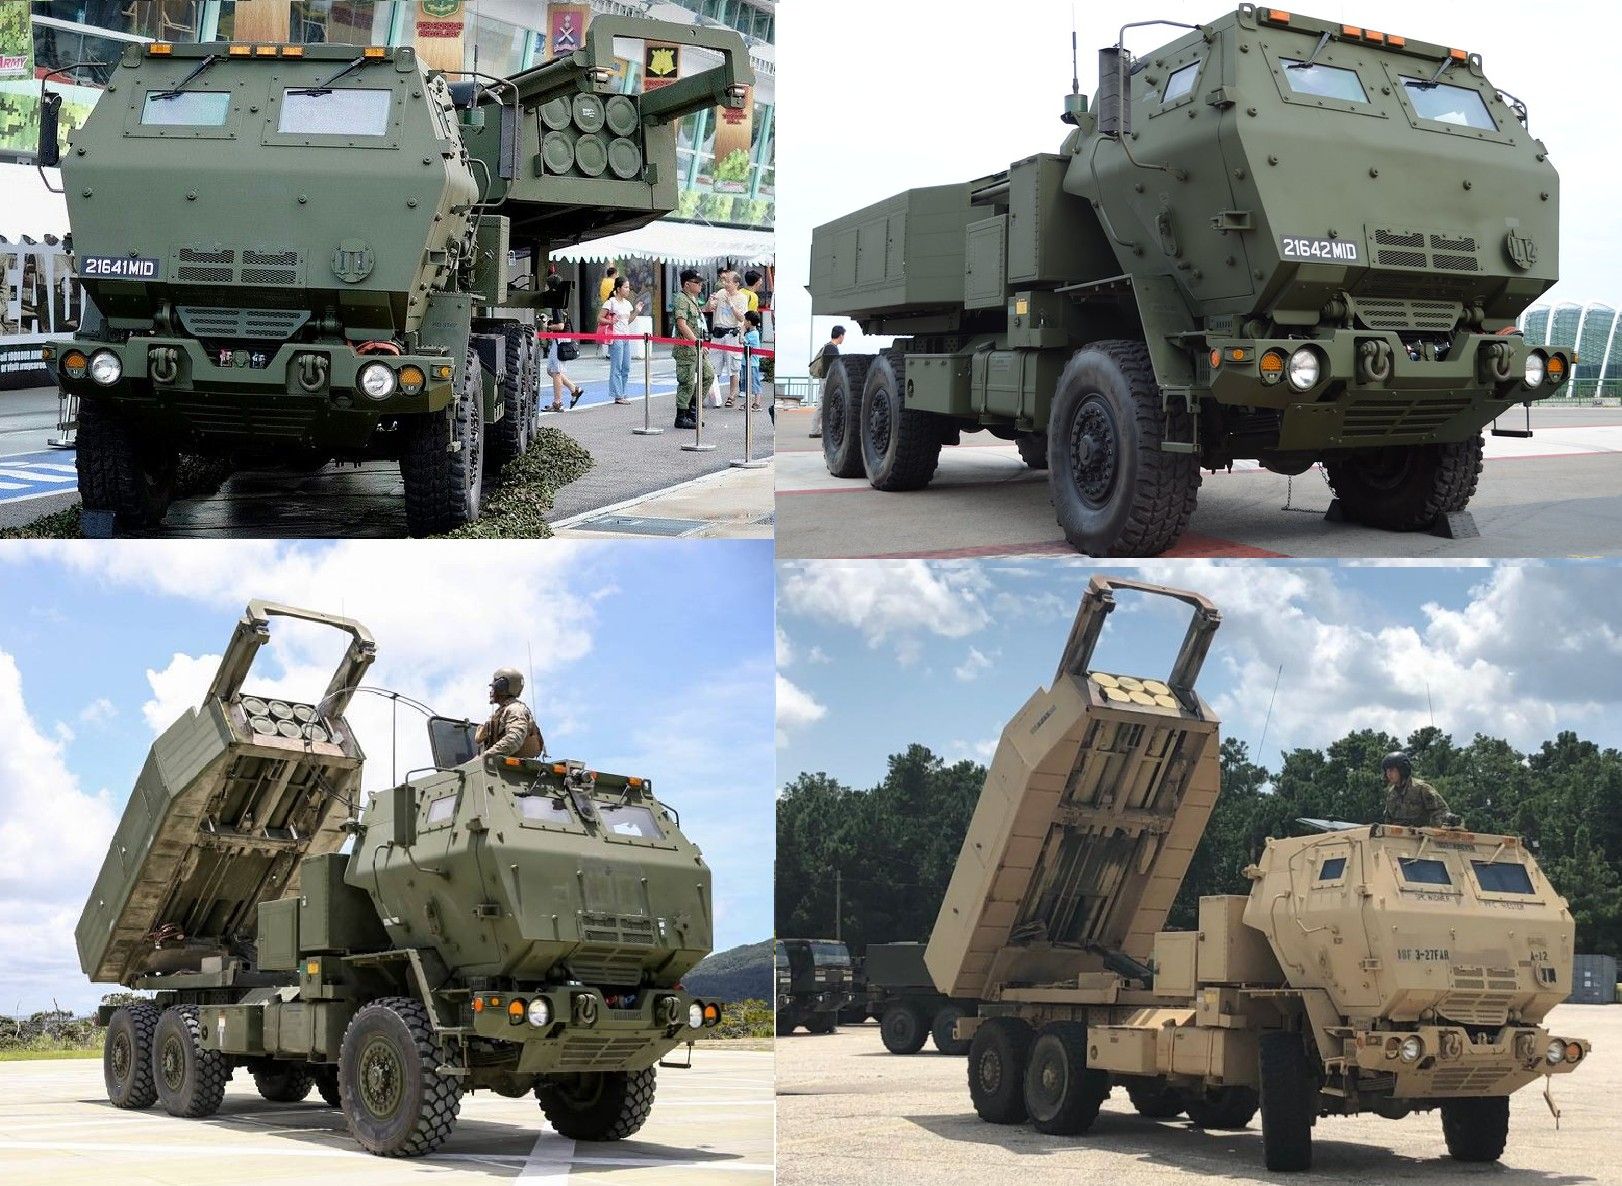 All HIMARS safe and sound - Russia has not destroyed a single multiple rocket launcher in Ukraine